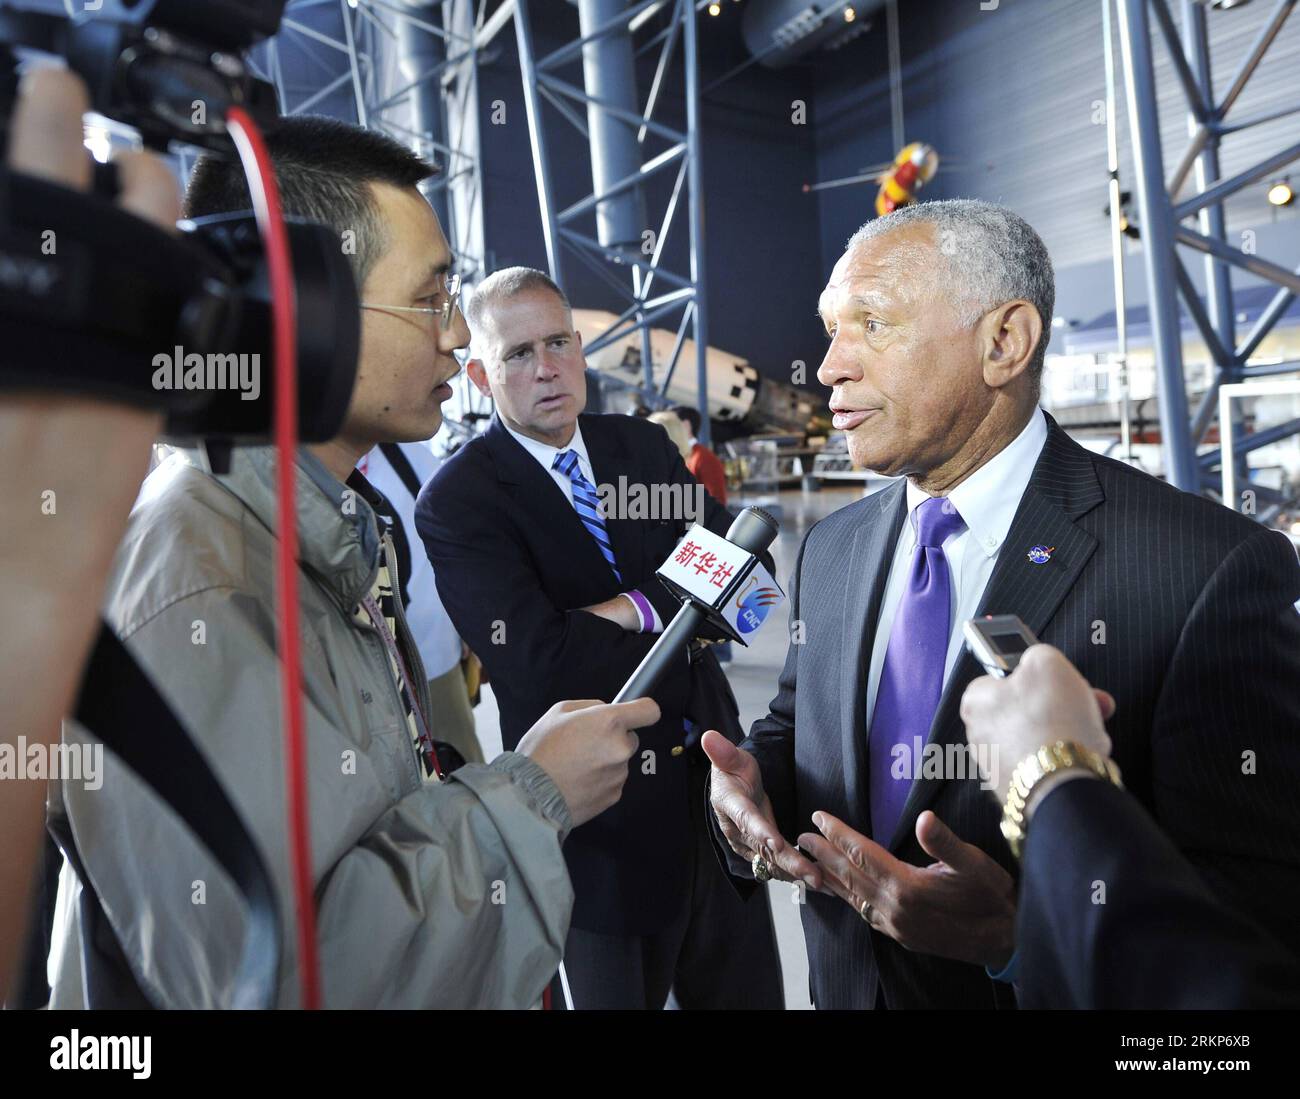 Bildnummer: 57914731  Datum: 19.04.2012  Copyright: imago/Xinhua (120420) -- WASHINGTON, April 20, 2012 (Xinhua) -- Charles Bolden, administrator of NASA, is interviewed by reporters following a transfer ceremony of space shuttle Discovery at the Smithsonian National Air and Space Museum Steven F. Udvar-Hazy Center in Chantilly, Virginia, the United States, April 19, 2012. U.S. space agency NASA transferred Thursday space shuttle Discovery to the Smithsonian s National Air and Space Museum, where it will go on permanent display. (Xinhua/Wang Yi ou) (dtf) U.S.-WASHINGTON-SPACE SHUTTLE DISCOVERY Stock Photo